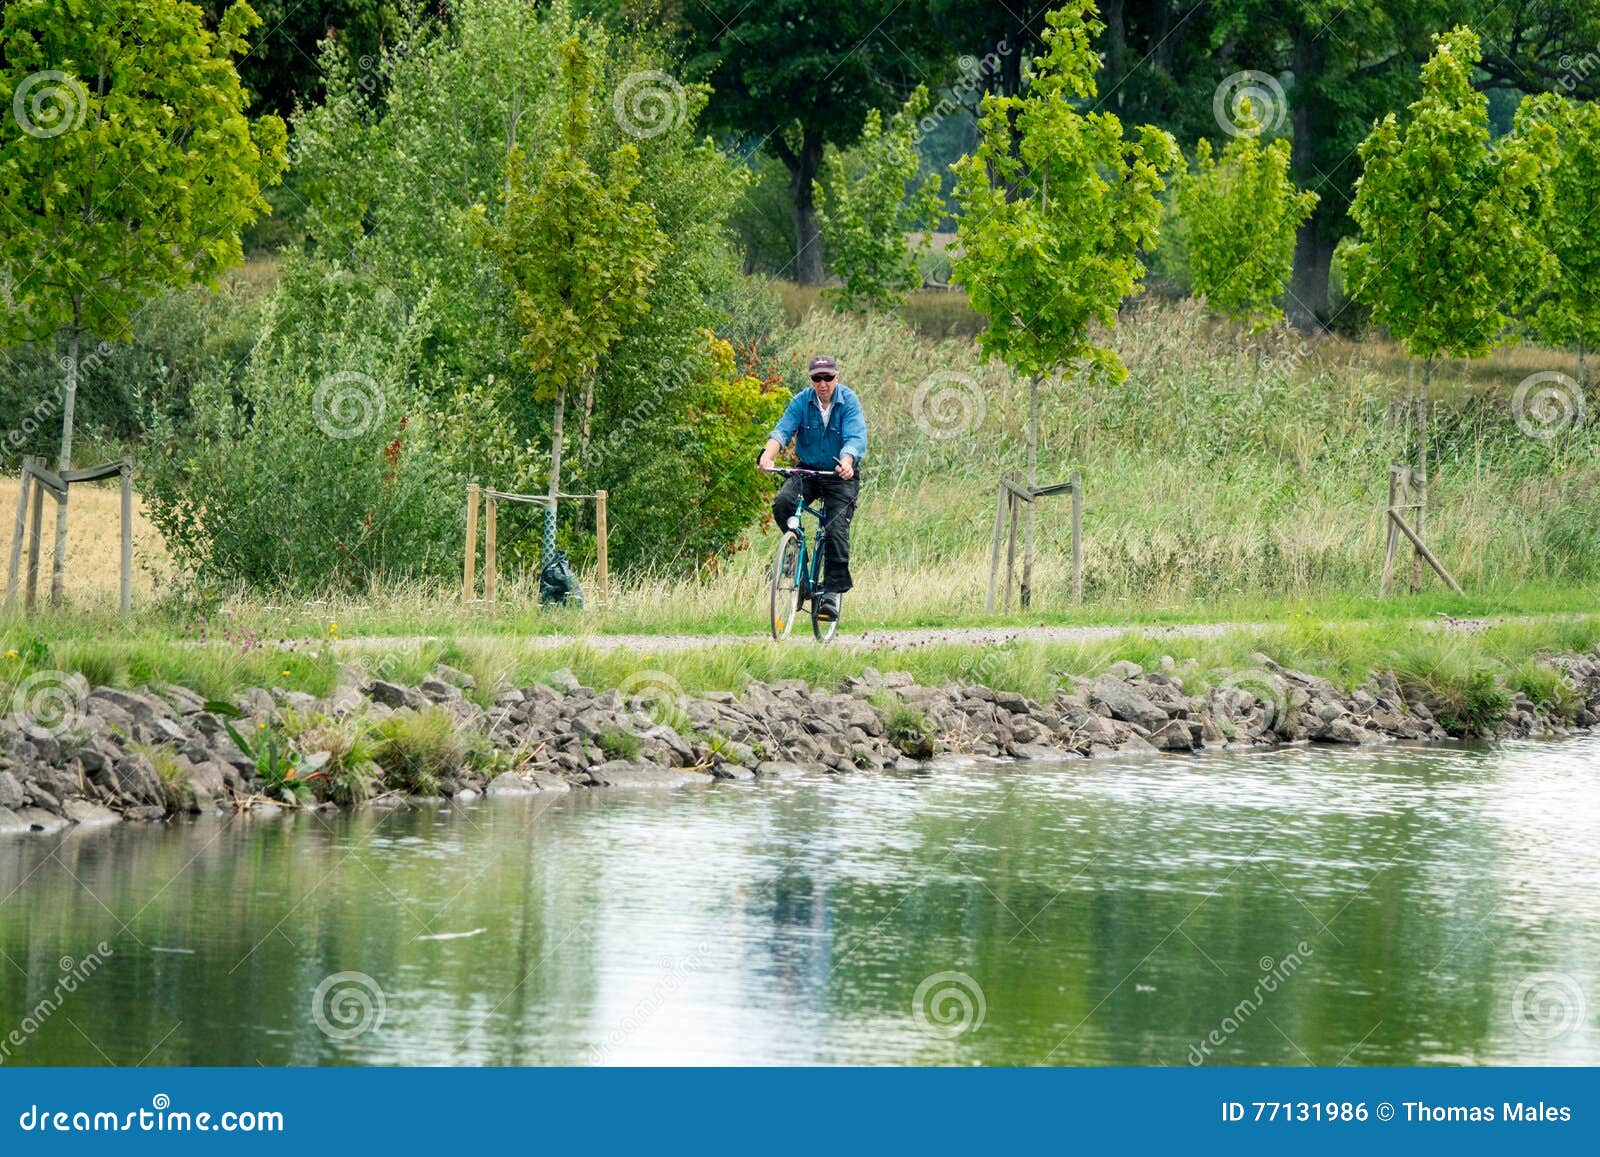 man on bicycle, gota canal, sweden